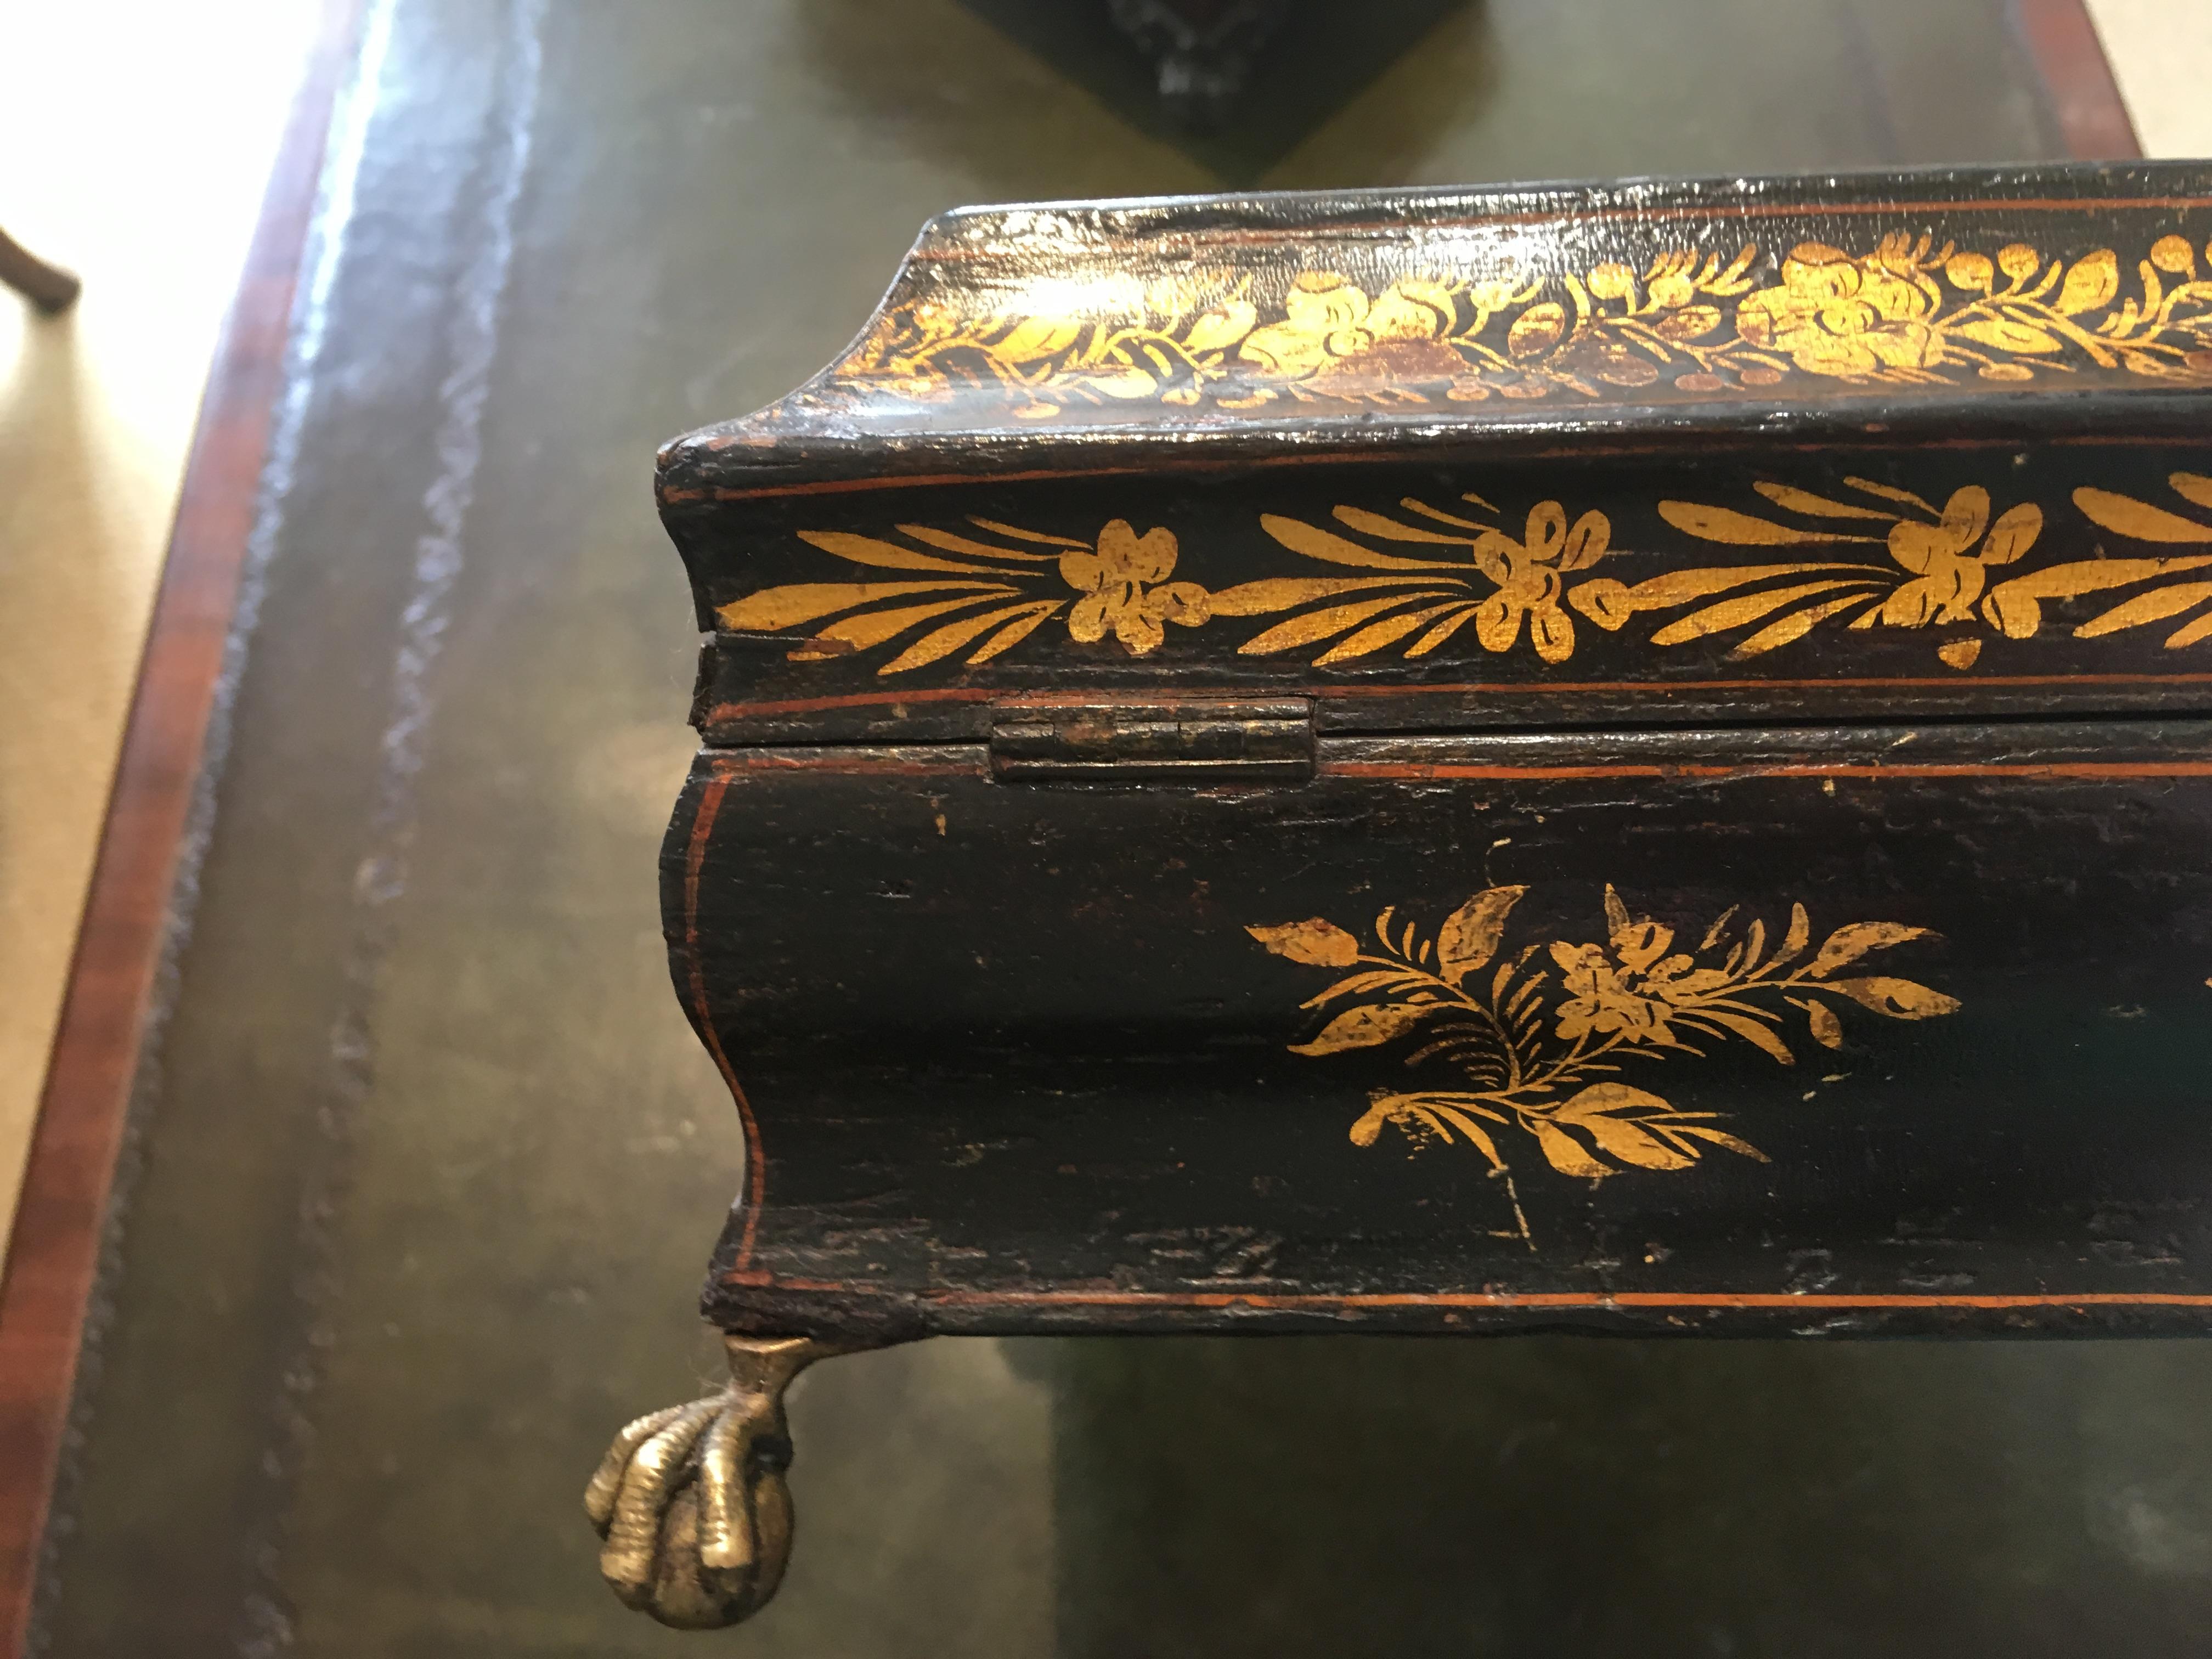 Early 19th Century Regency Period Japanned and Chinoiserie Lacquered Casket im Angebot 1